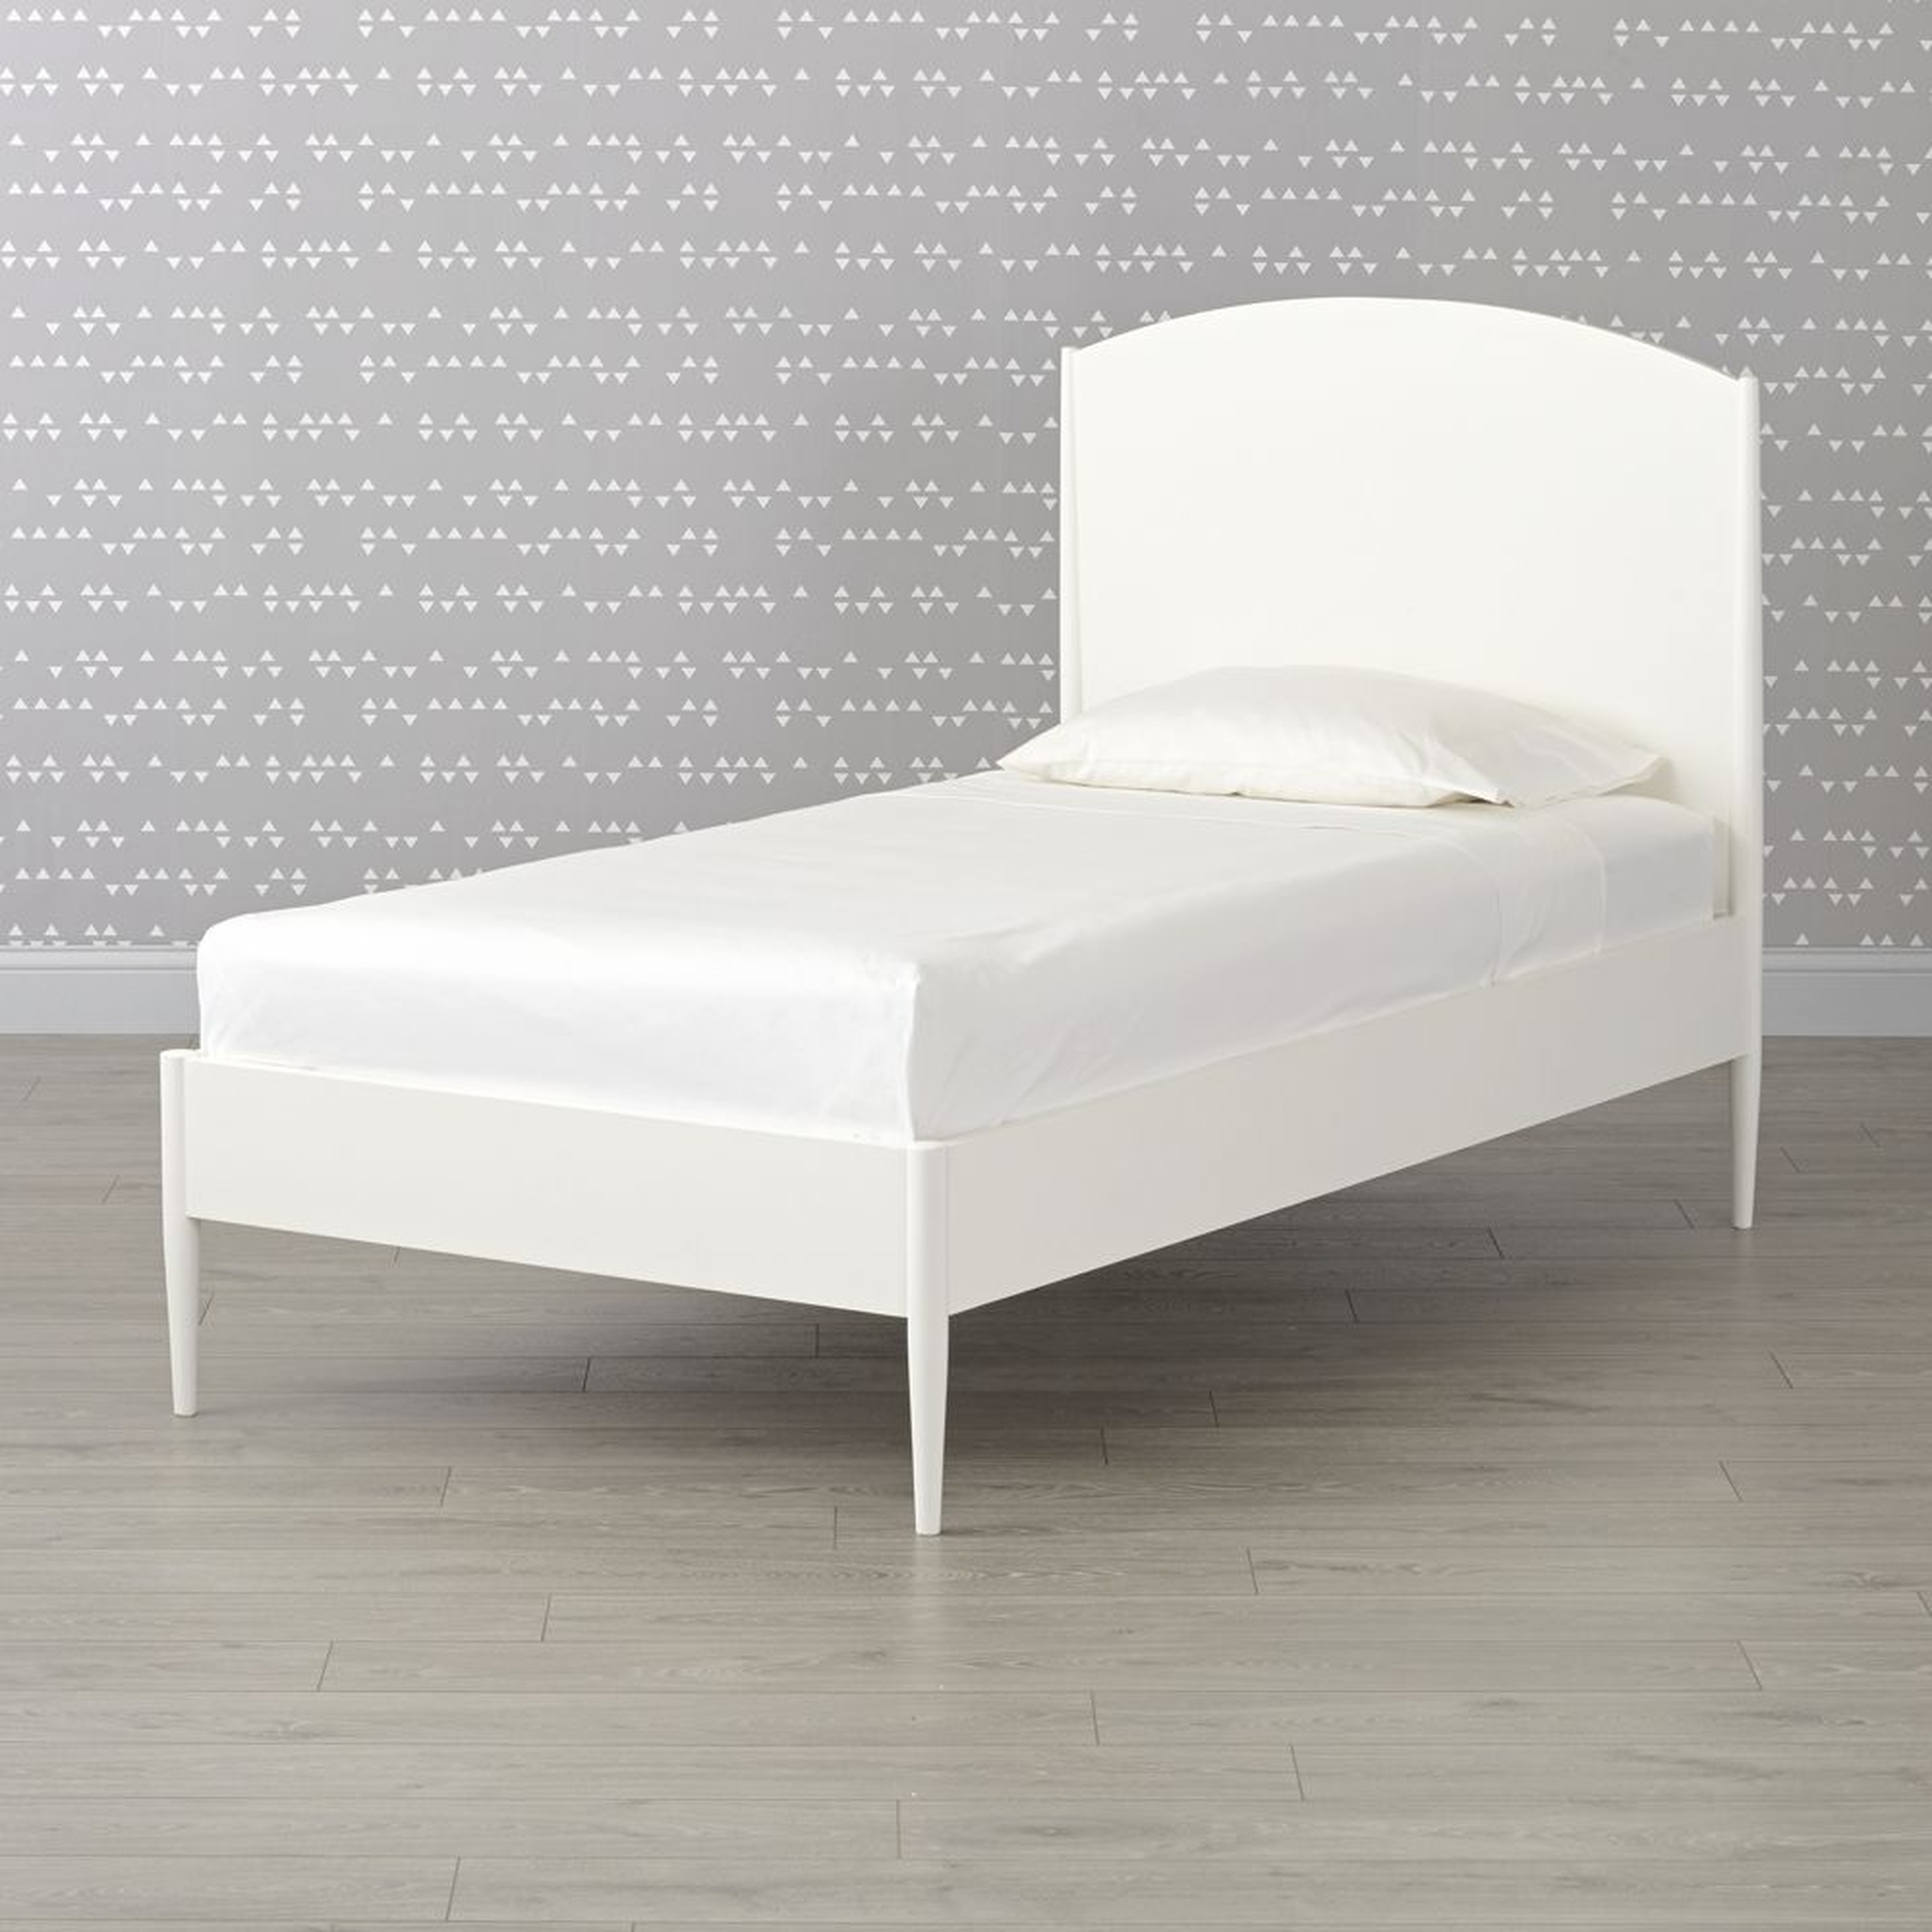 Hampshire White Arched Twin Bed - Crate and Barrel